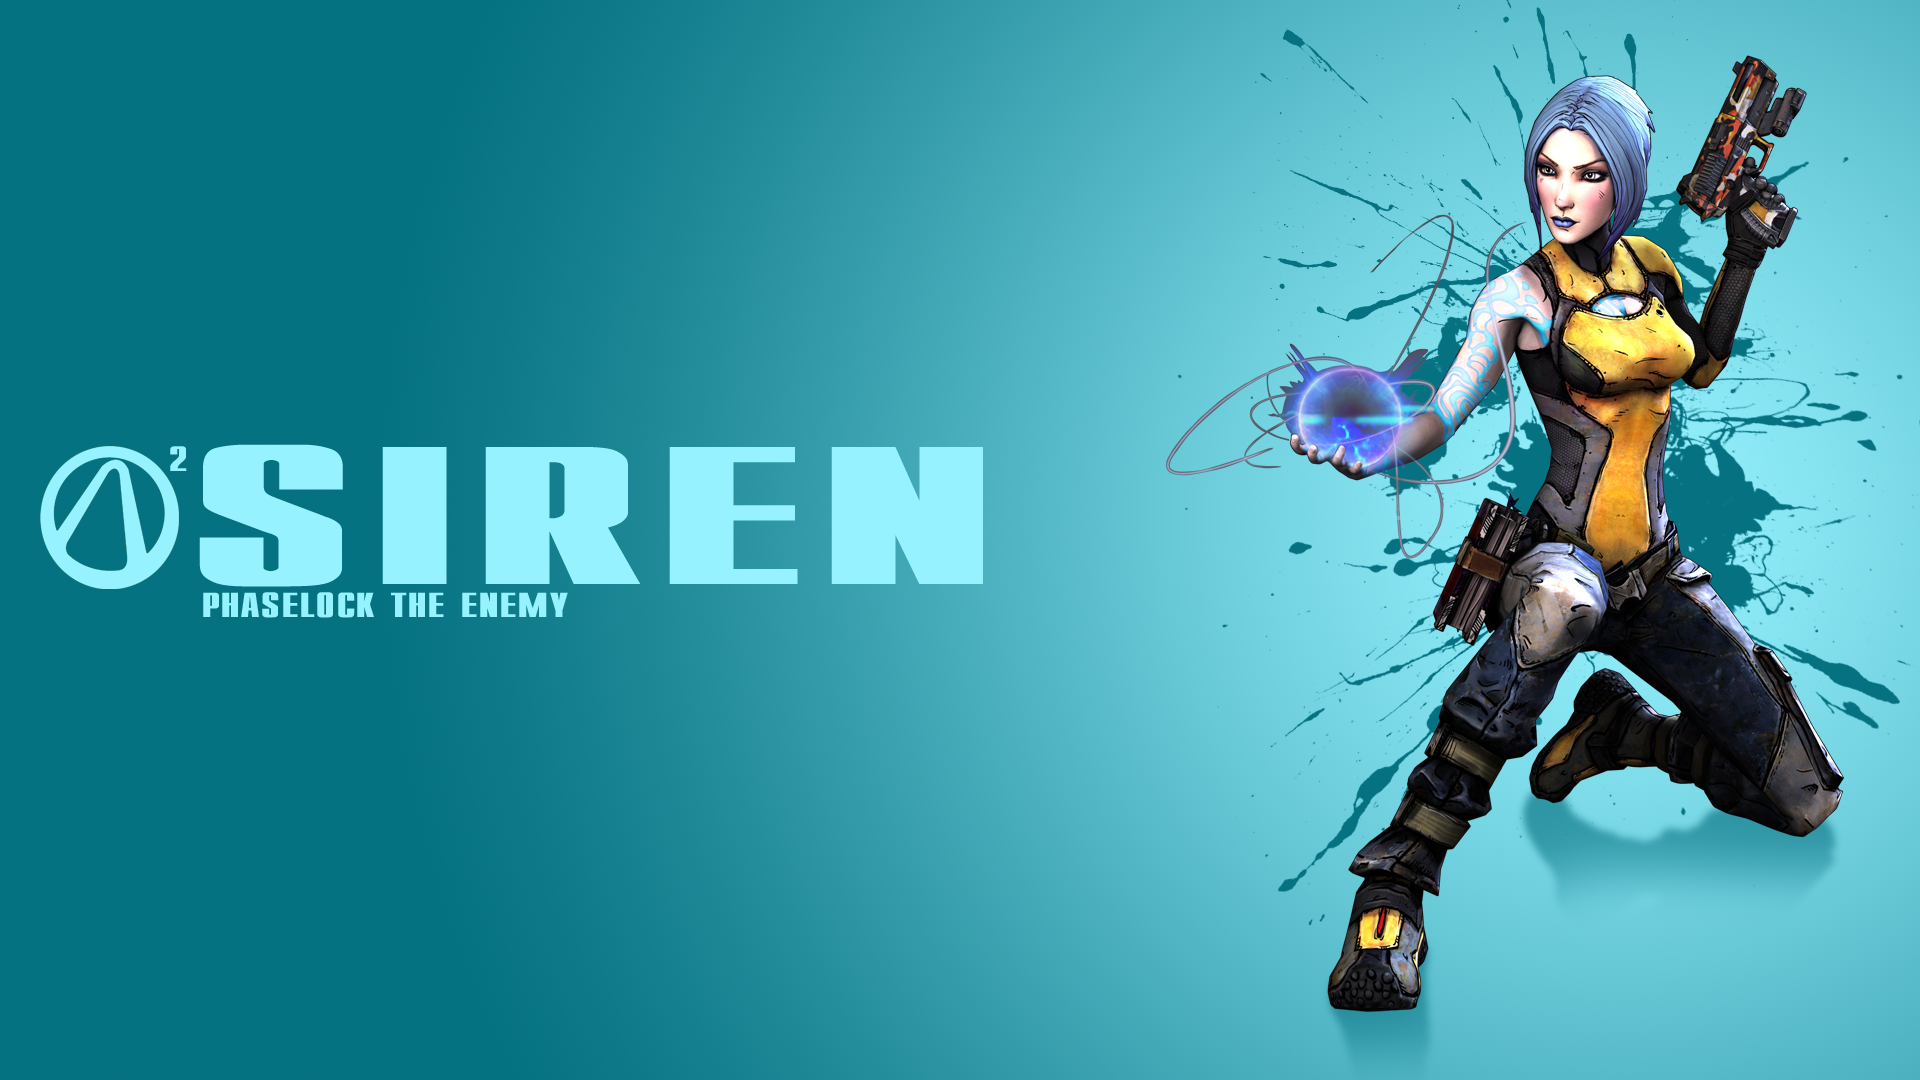 Represent Your Borderlands 2 Character With Some Fancy Wallpaper